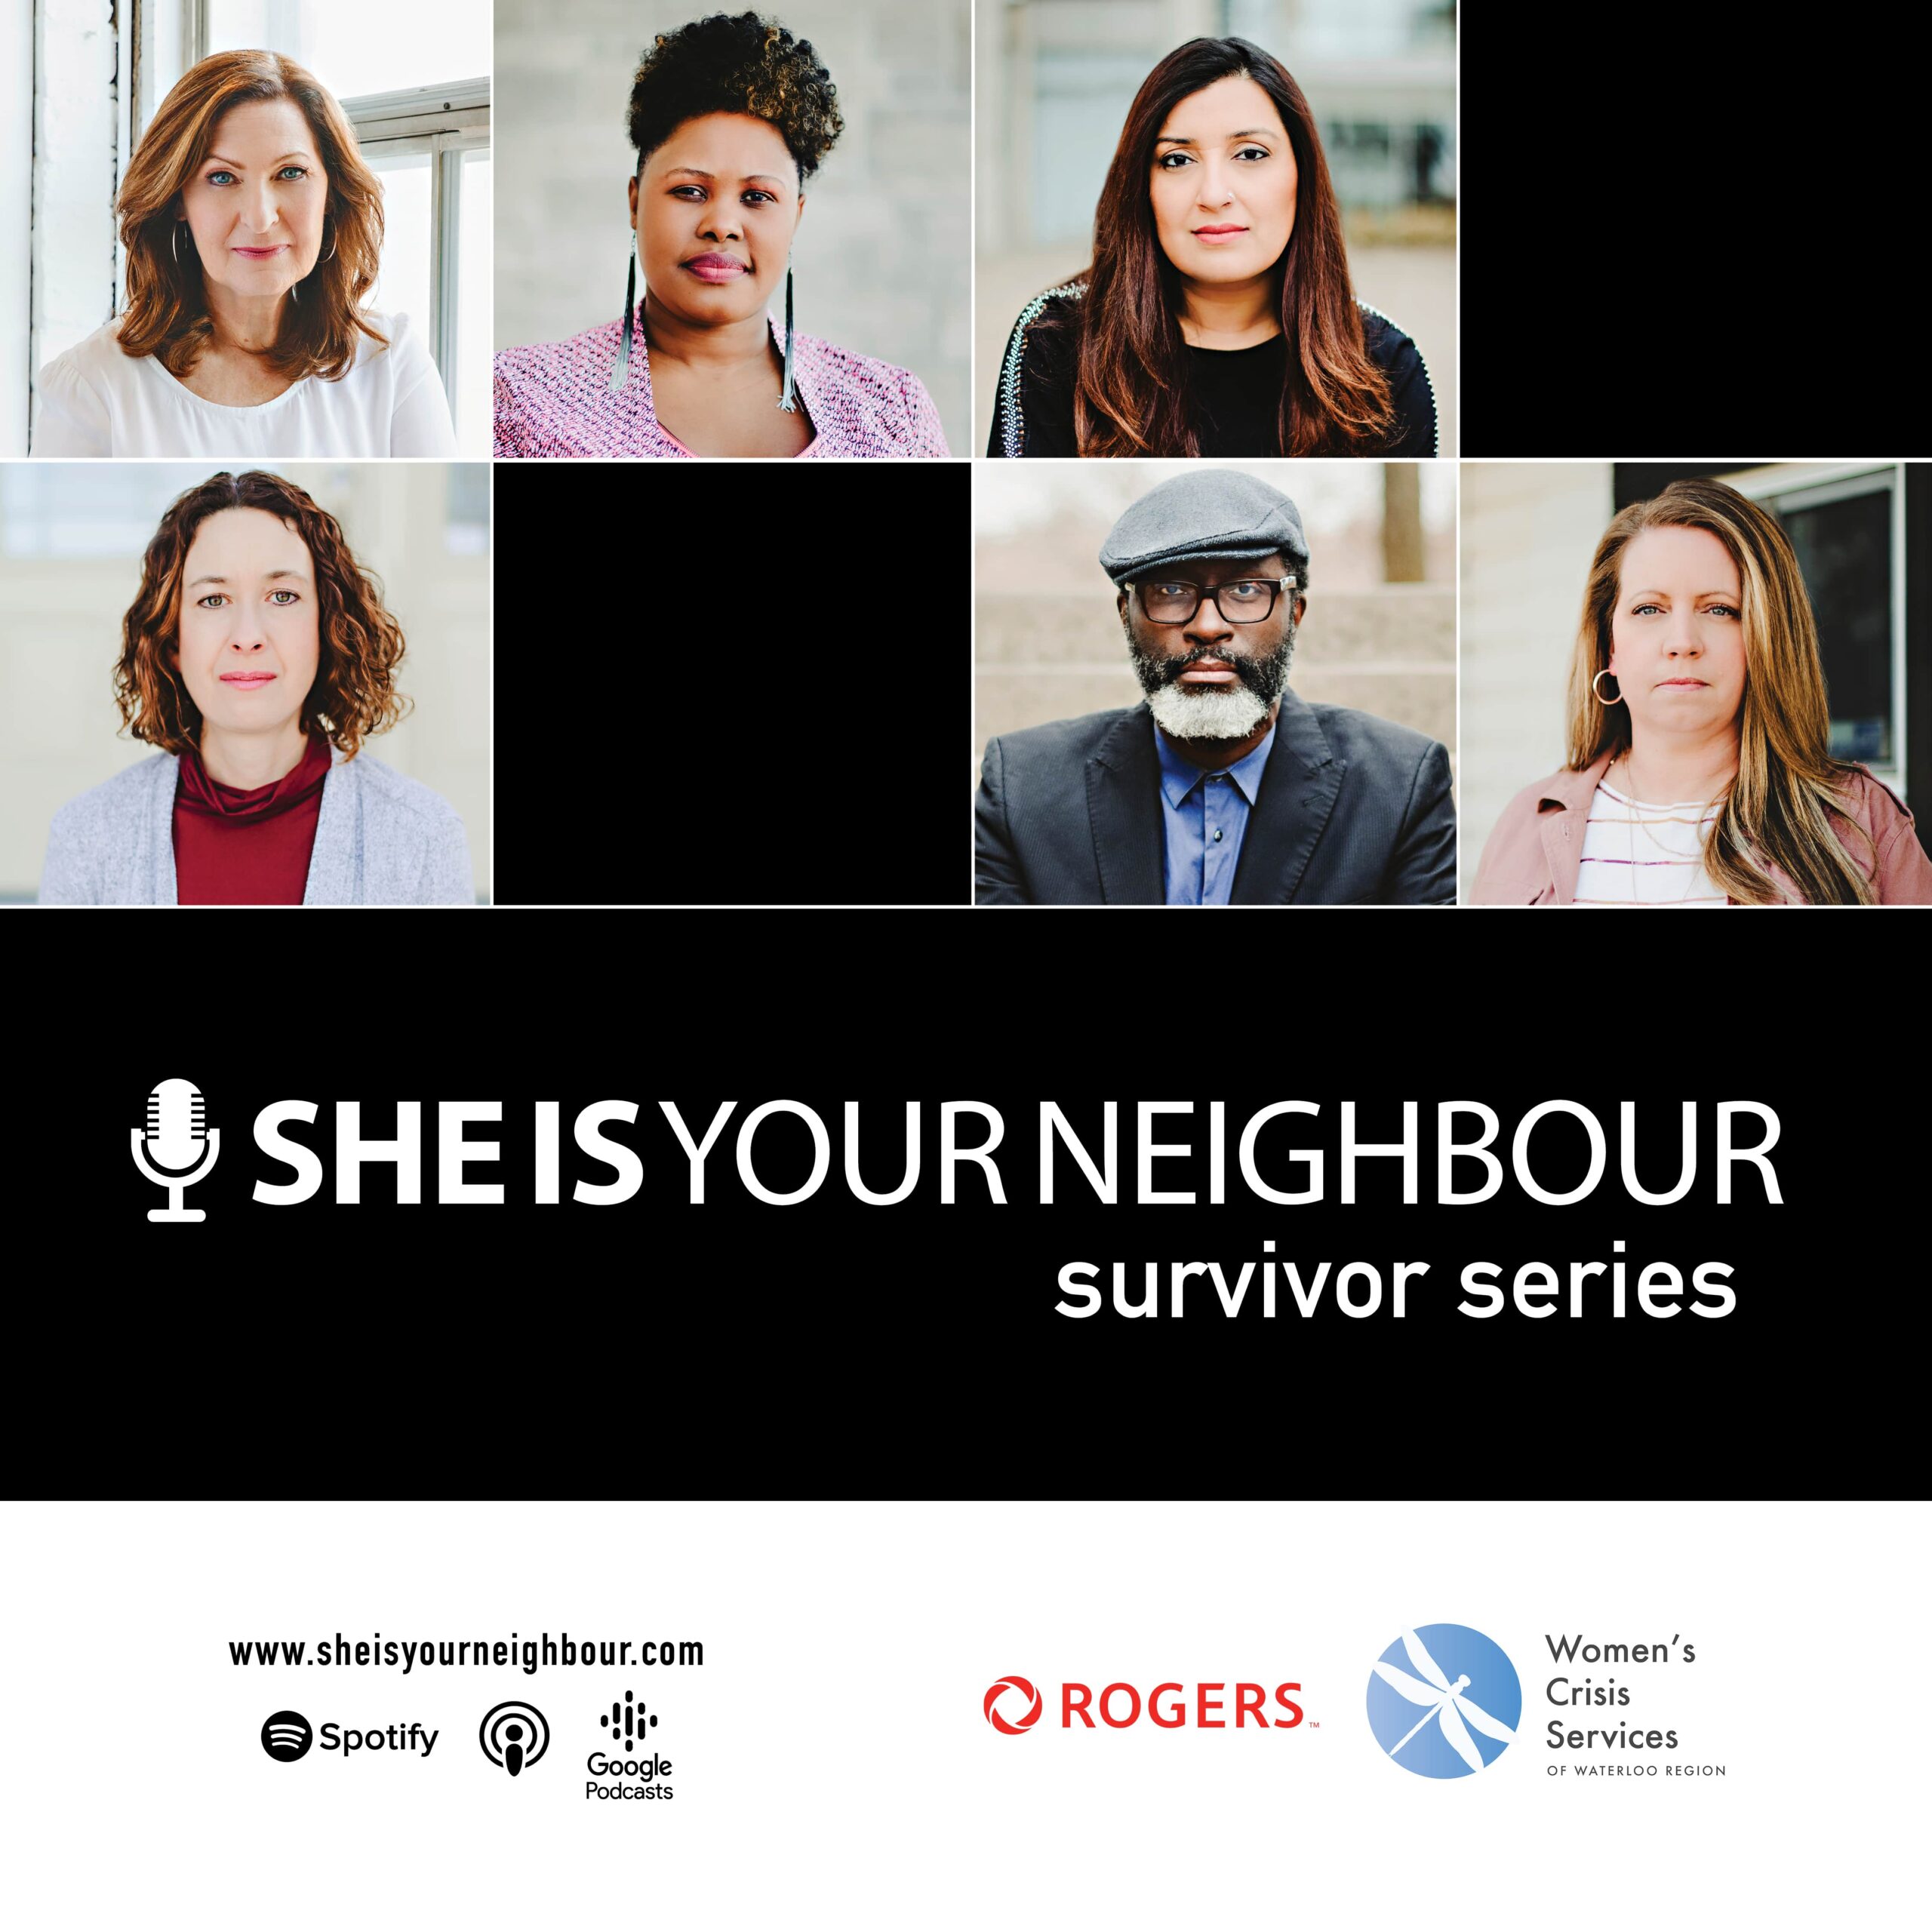 Femicide the focus of new ‘She is Your Neighbour’ podcast series by Women’s Crisis Services of Waterloo Region